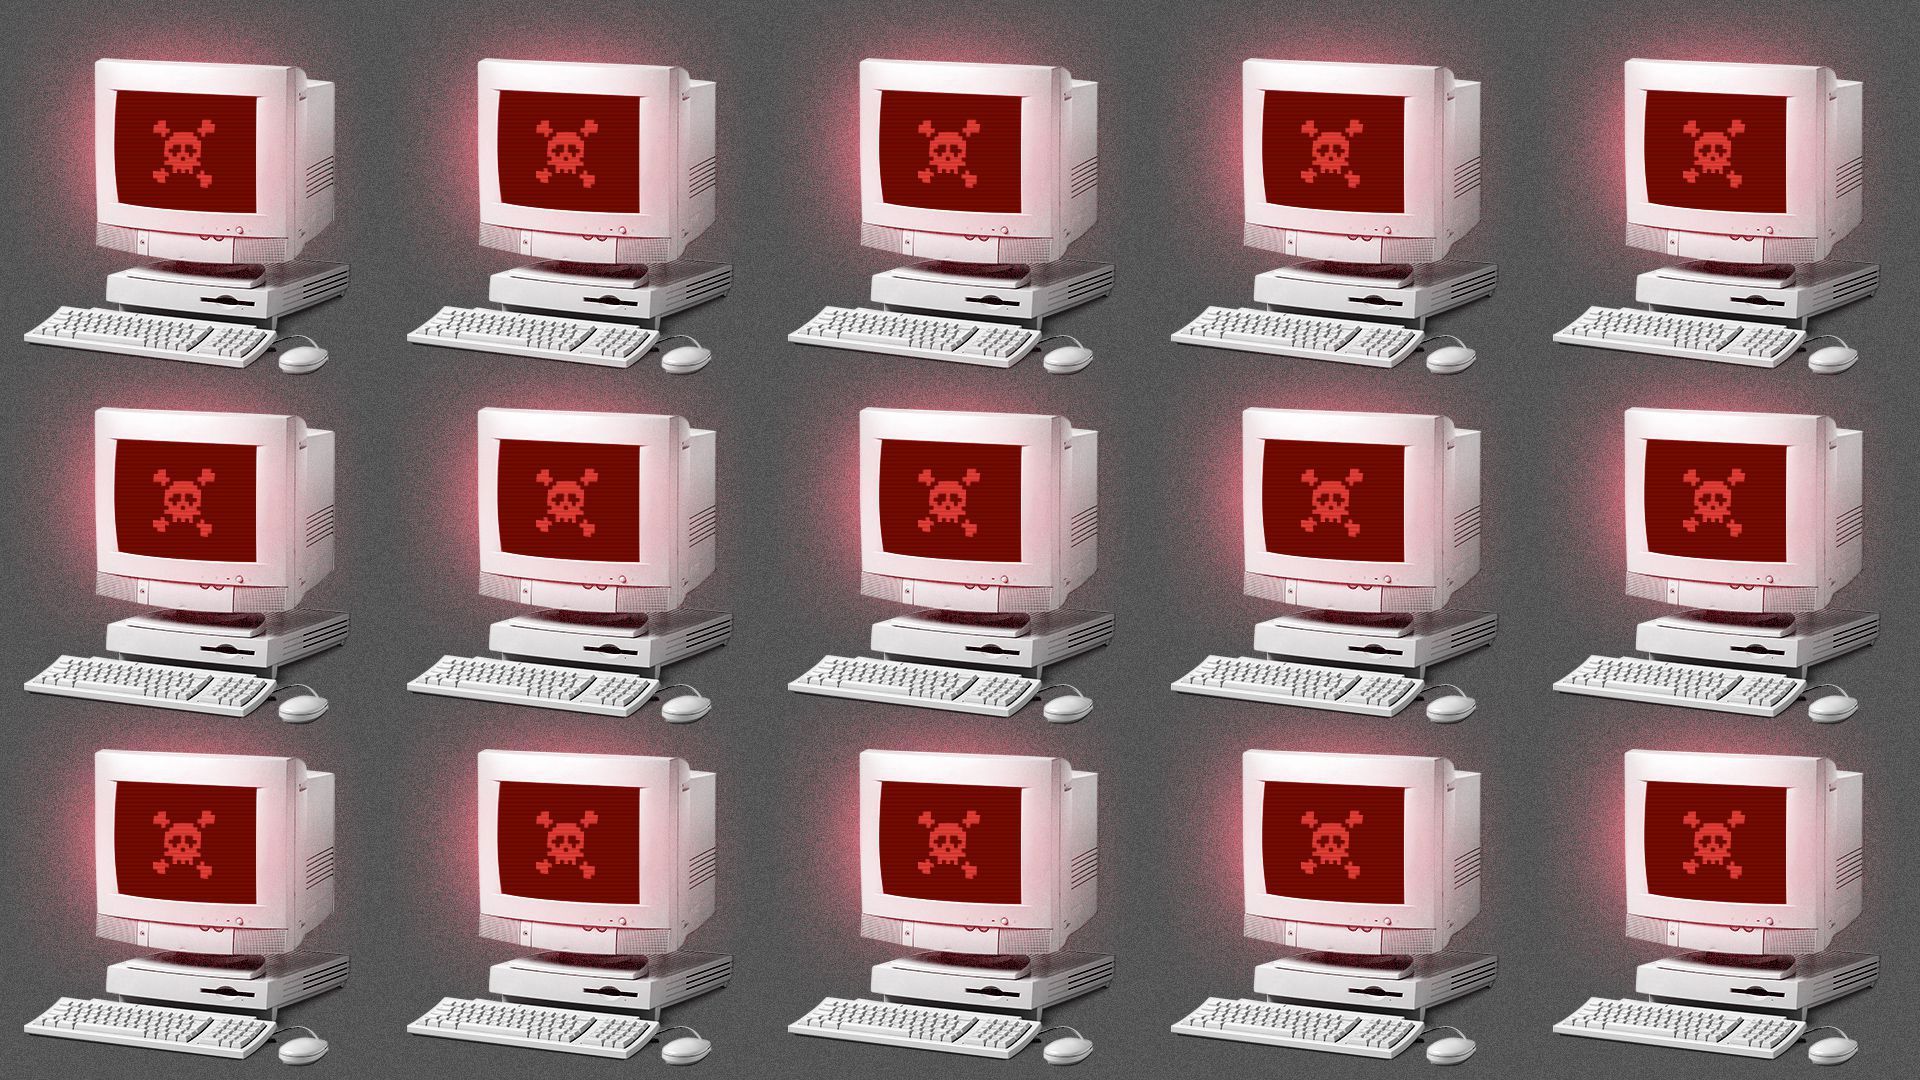 Computers with ransomware signs